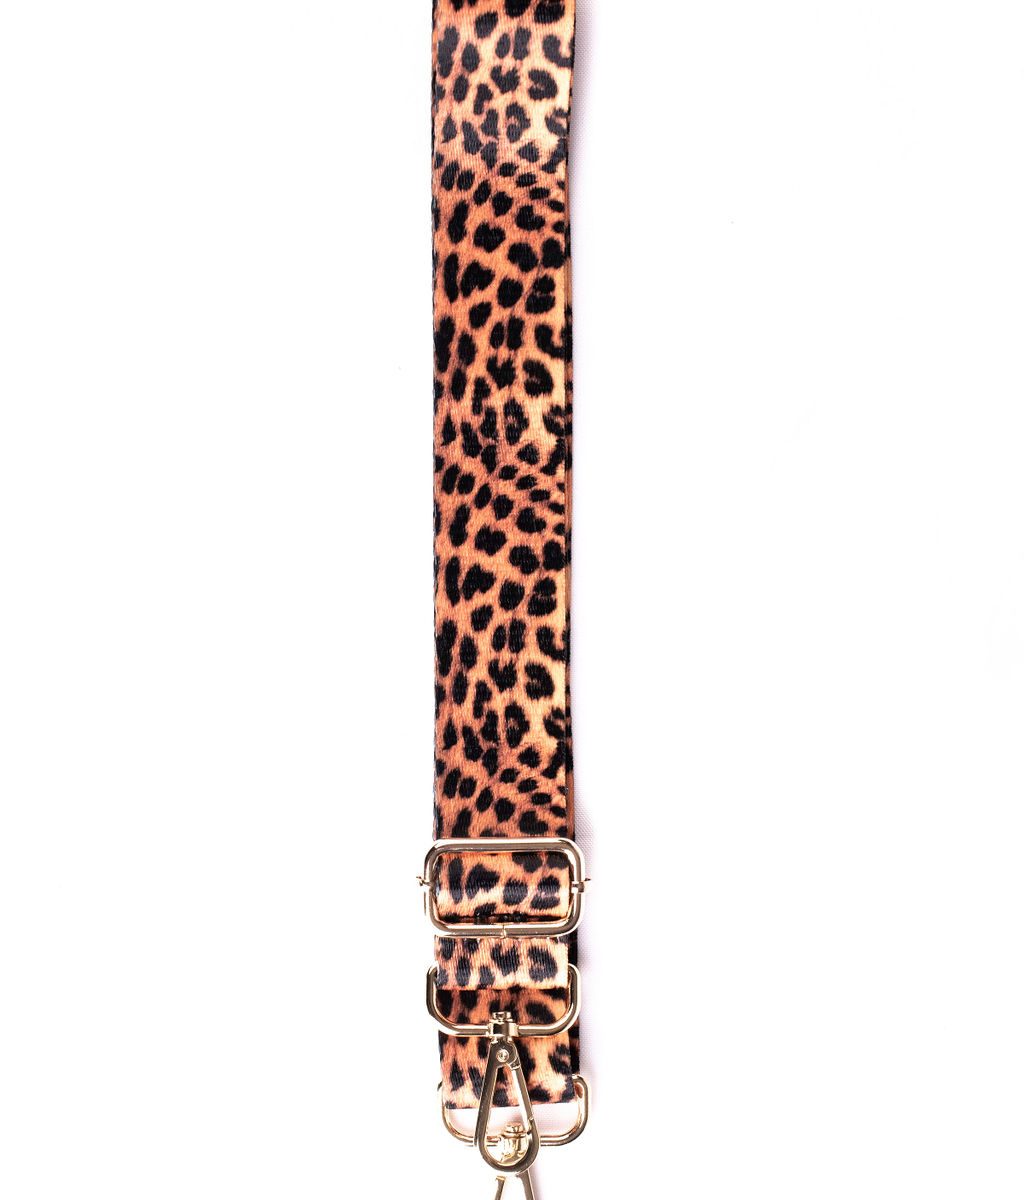 STRAP WILD MOCHIS MUJER